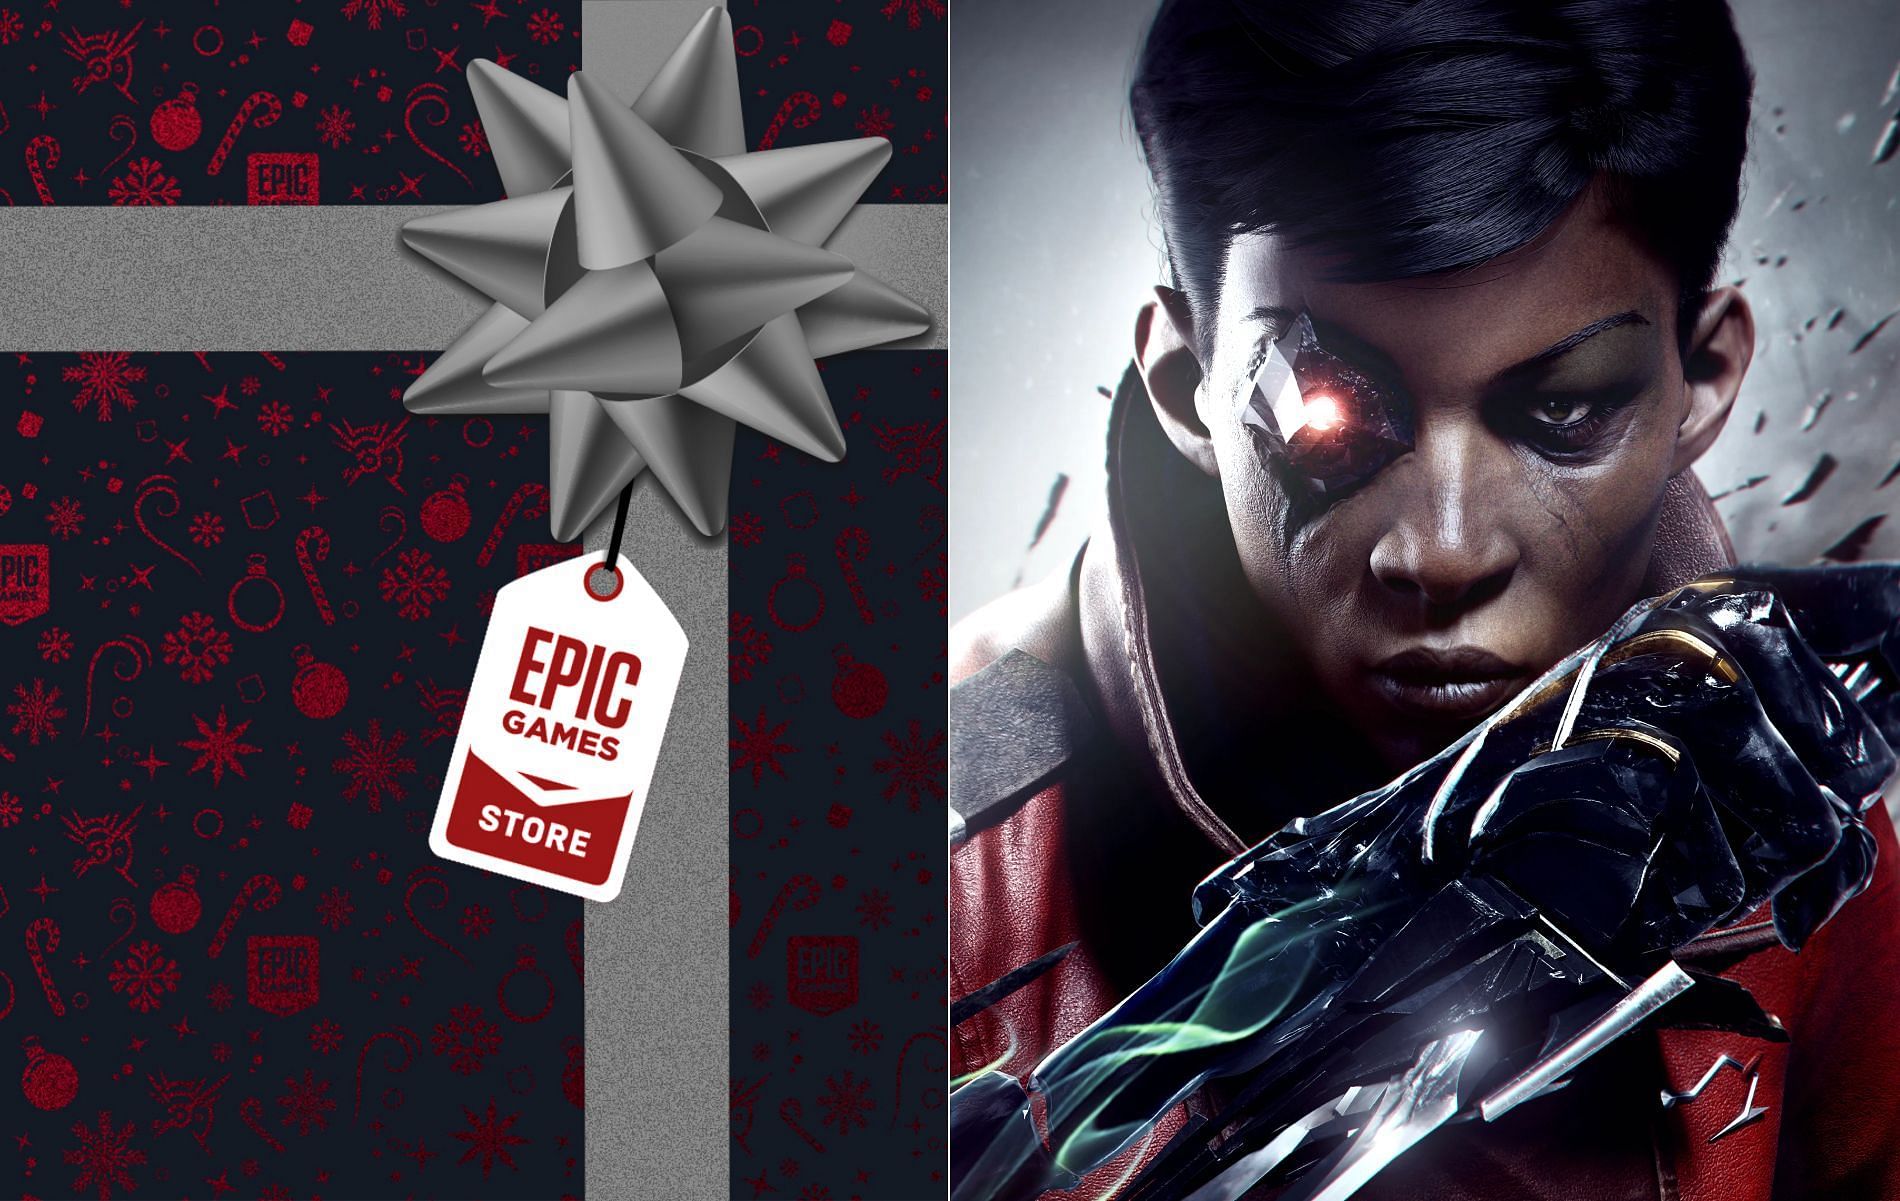 Dishonored 2 Free Trial is Now Available - The Game Fanatics